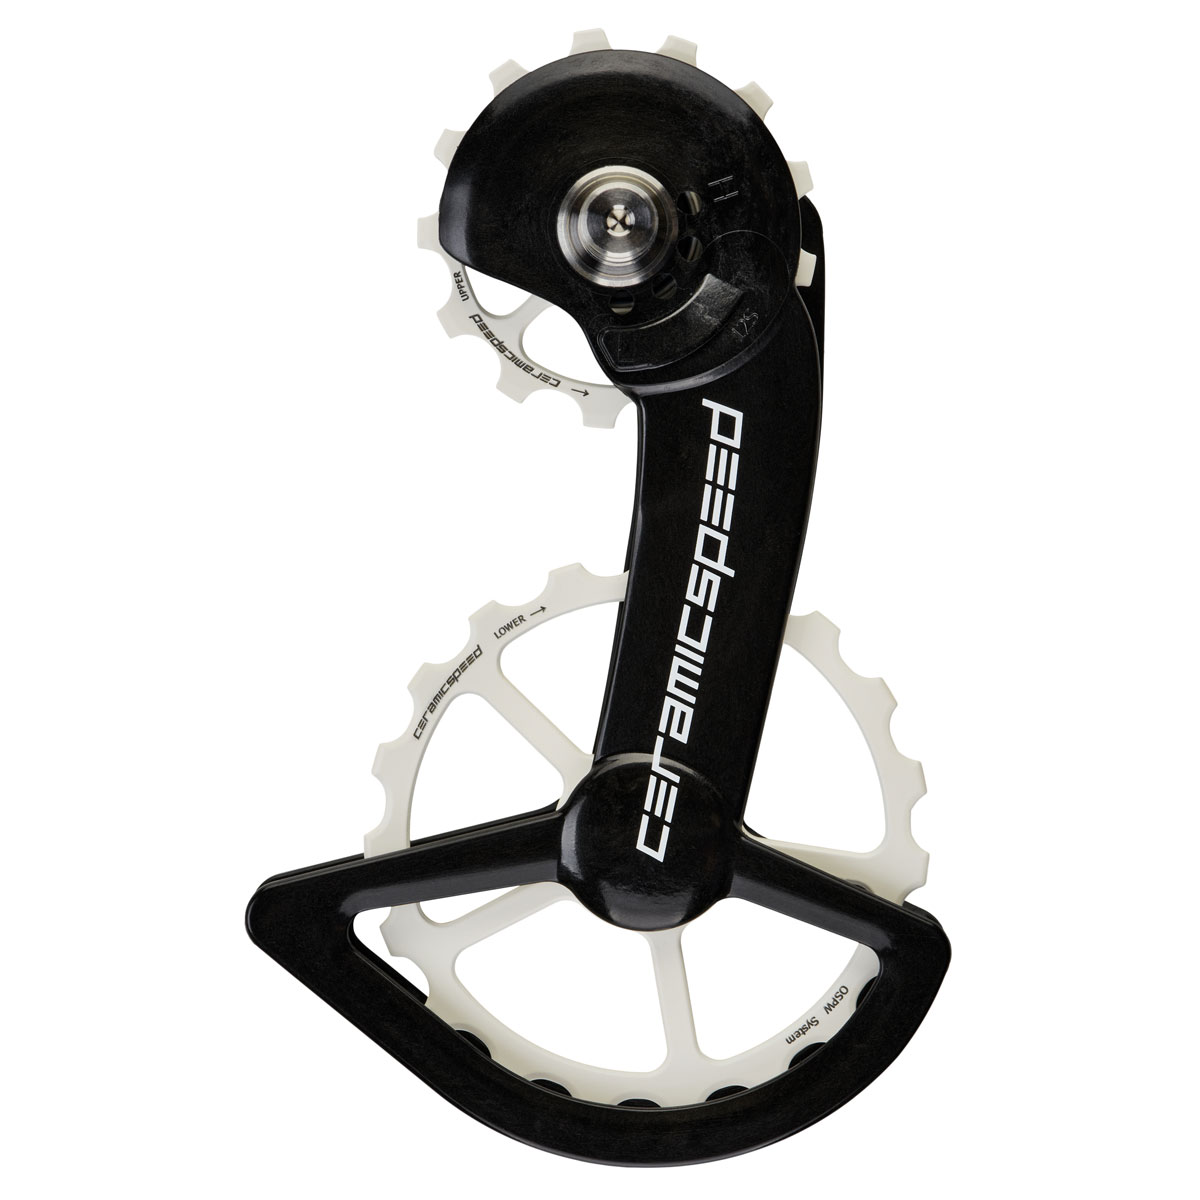 Productfoto van CeramicSpeed OSPW Derailleurwieltje Systeem - voor Shimano R9250/R8150 (12s) | 13/19 Tanden | Gecoate Lagers | Cerakote Limited Edition - wit